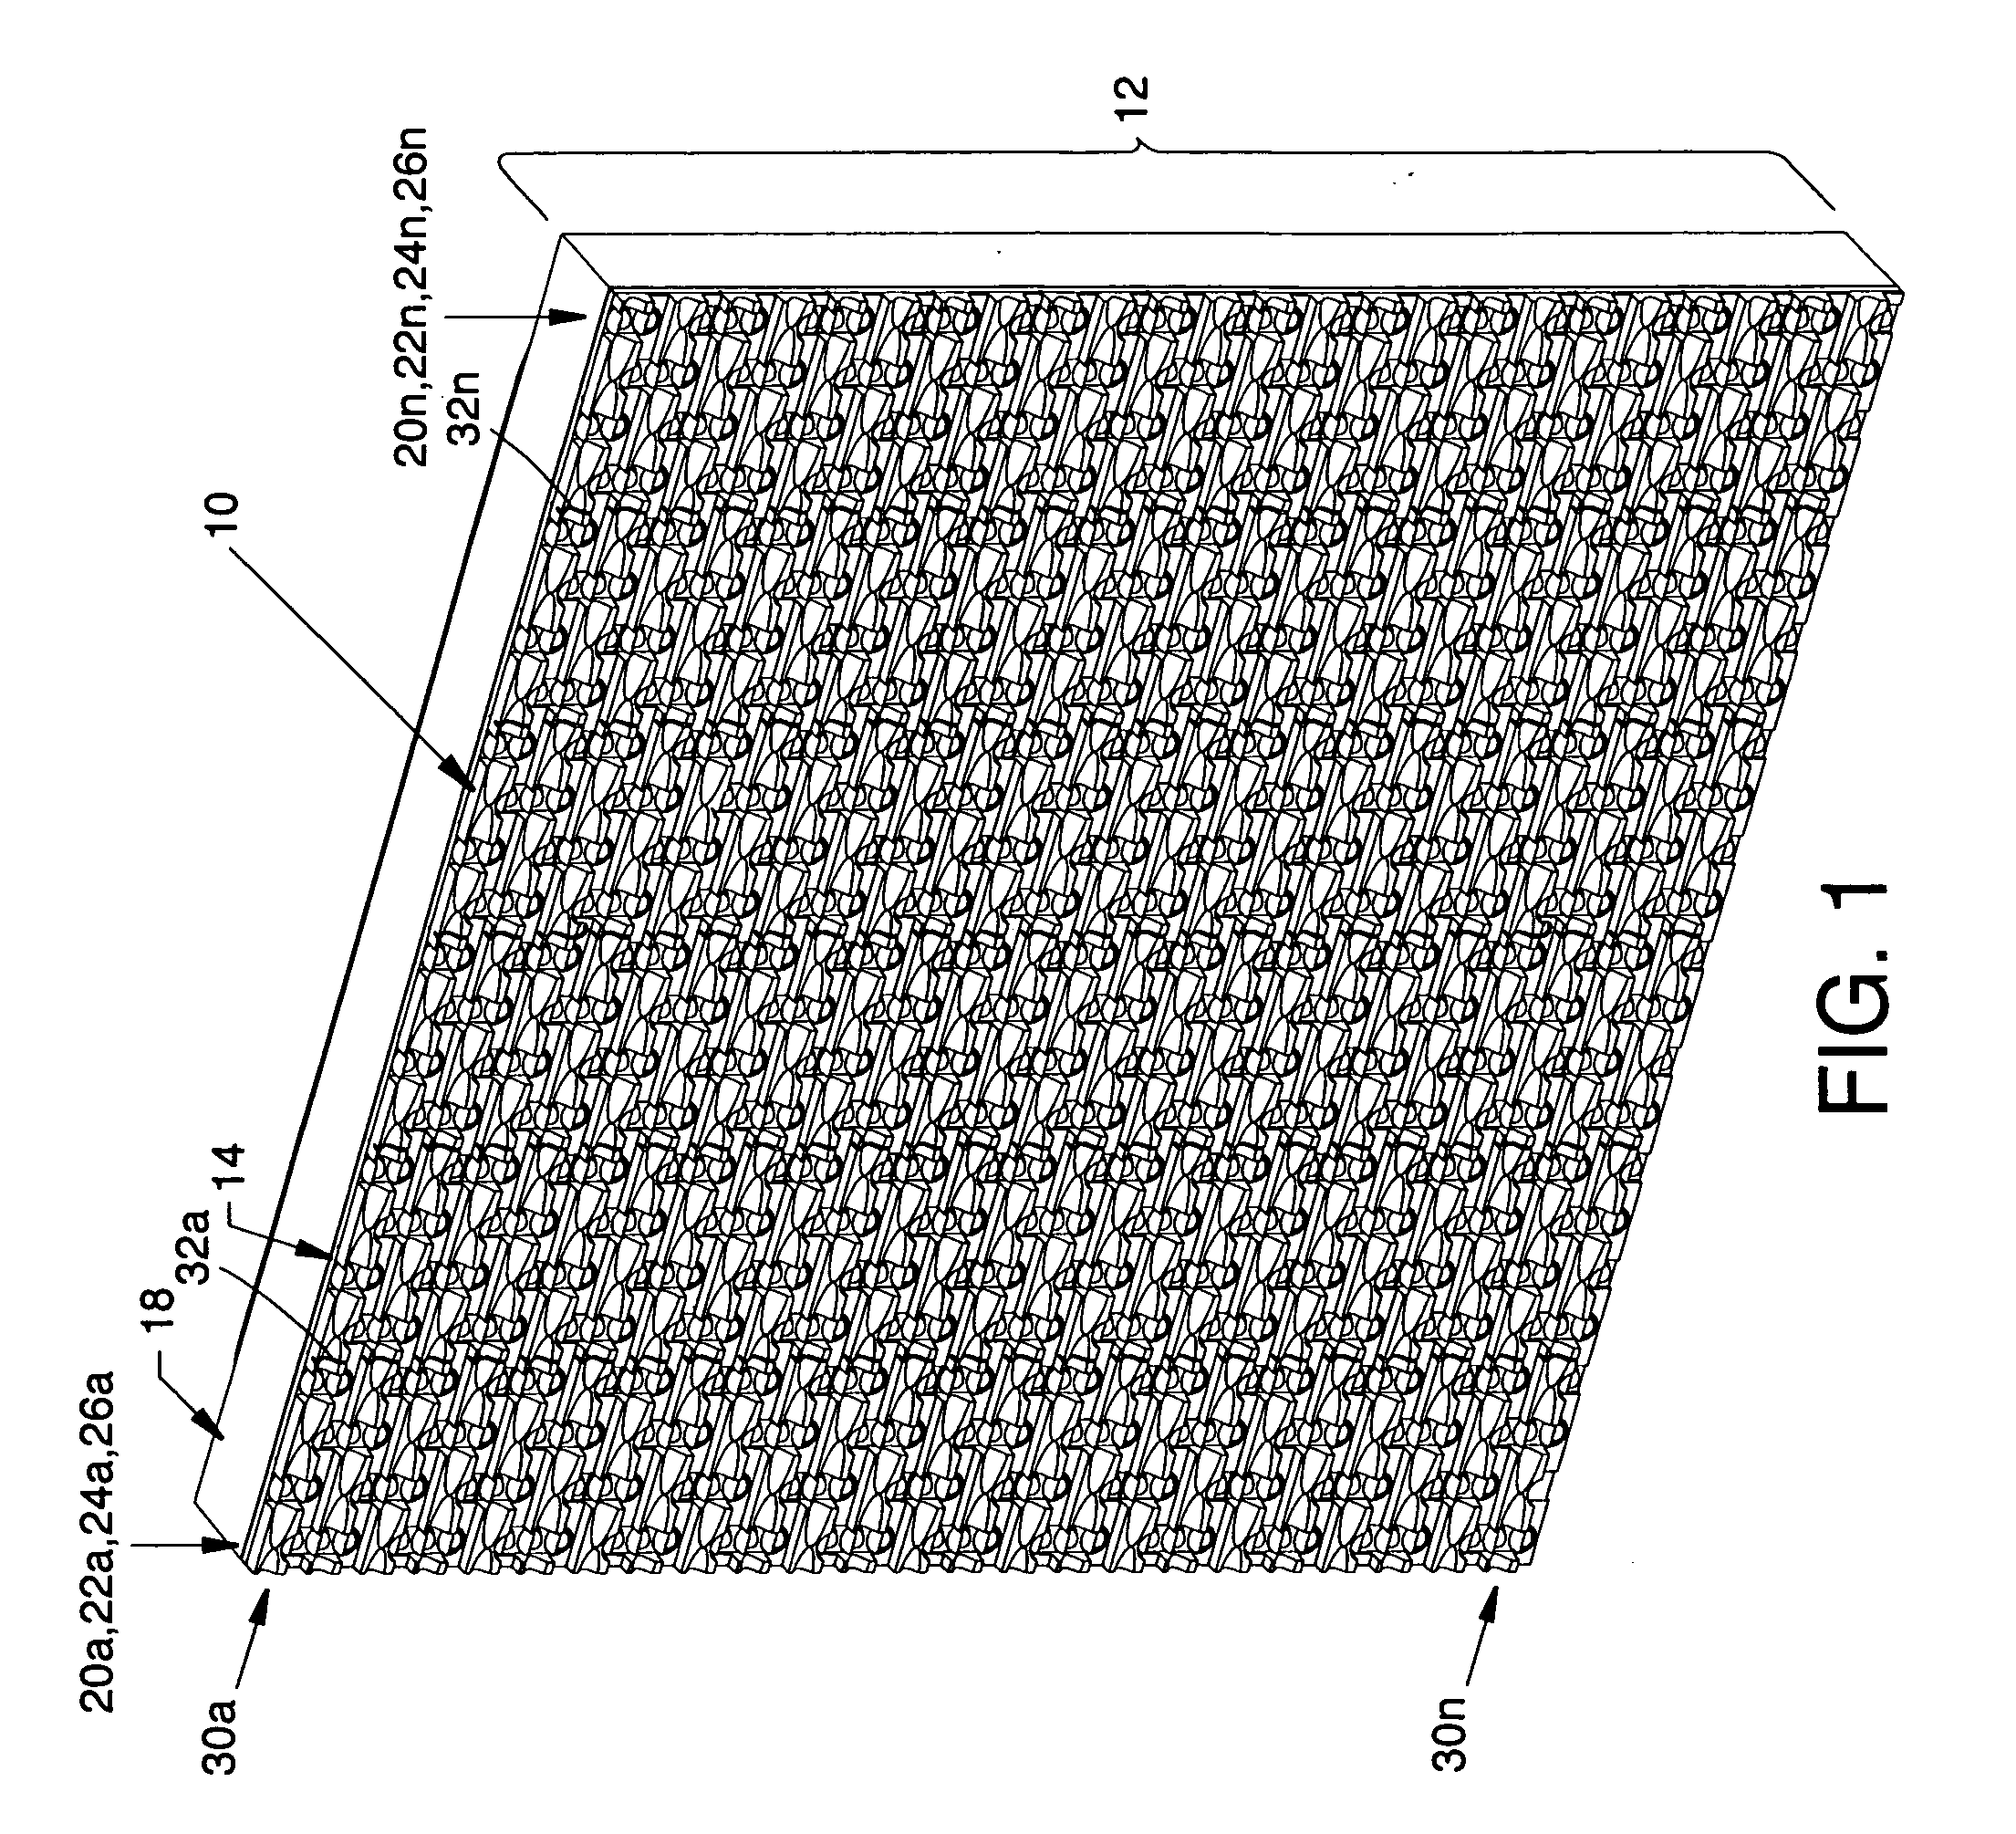 Thermoplastic elastomer protective louver covering for use with an electronic display module